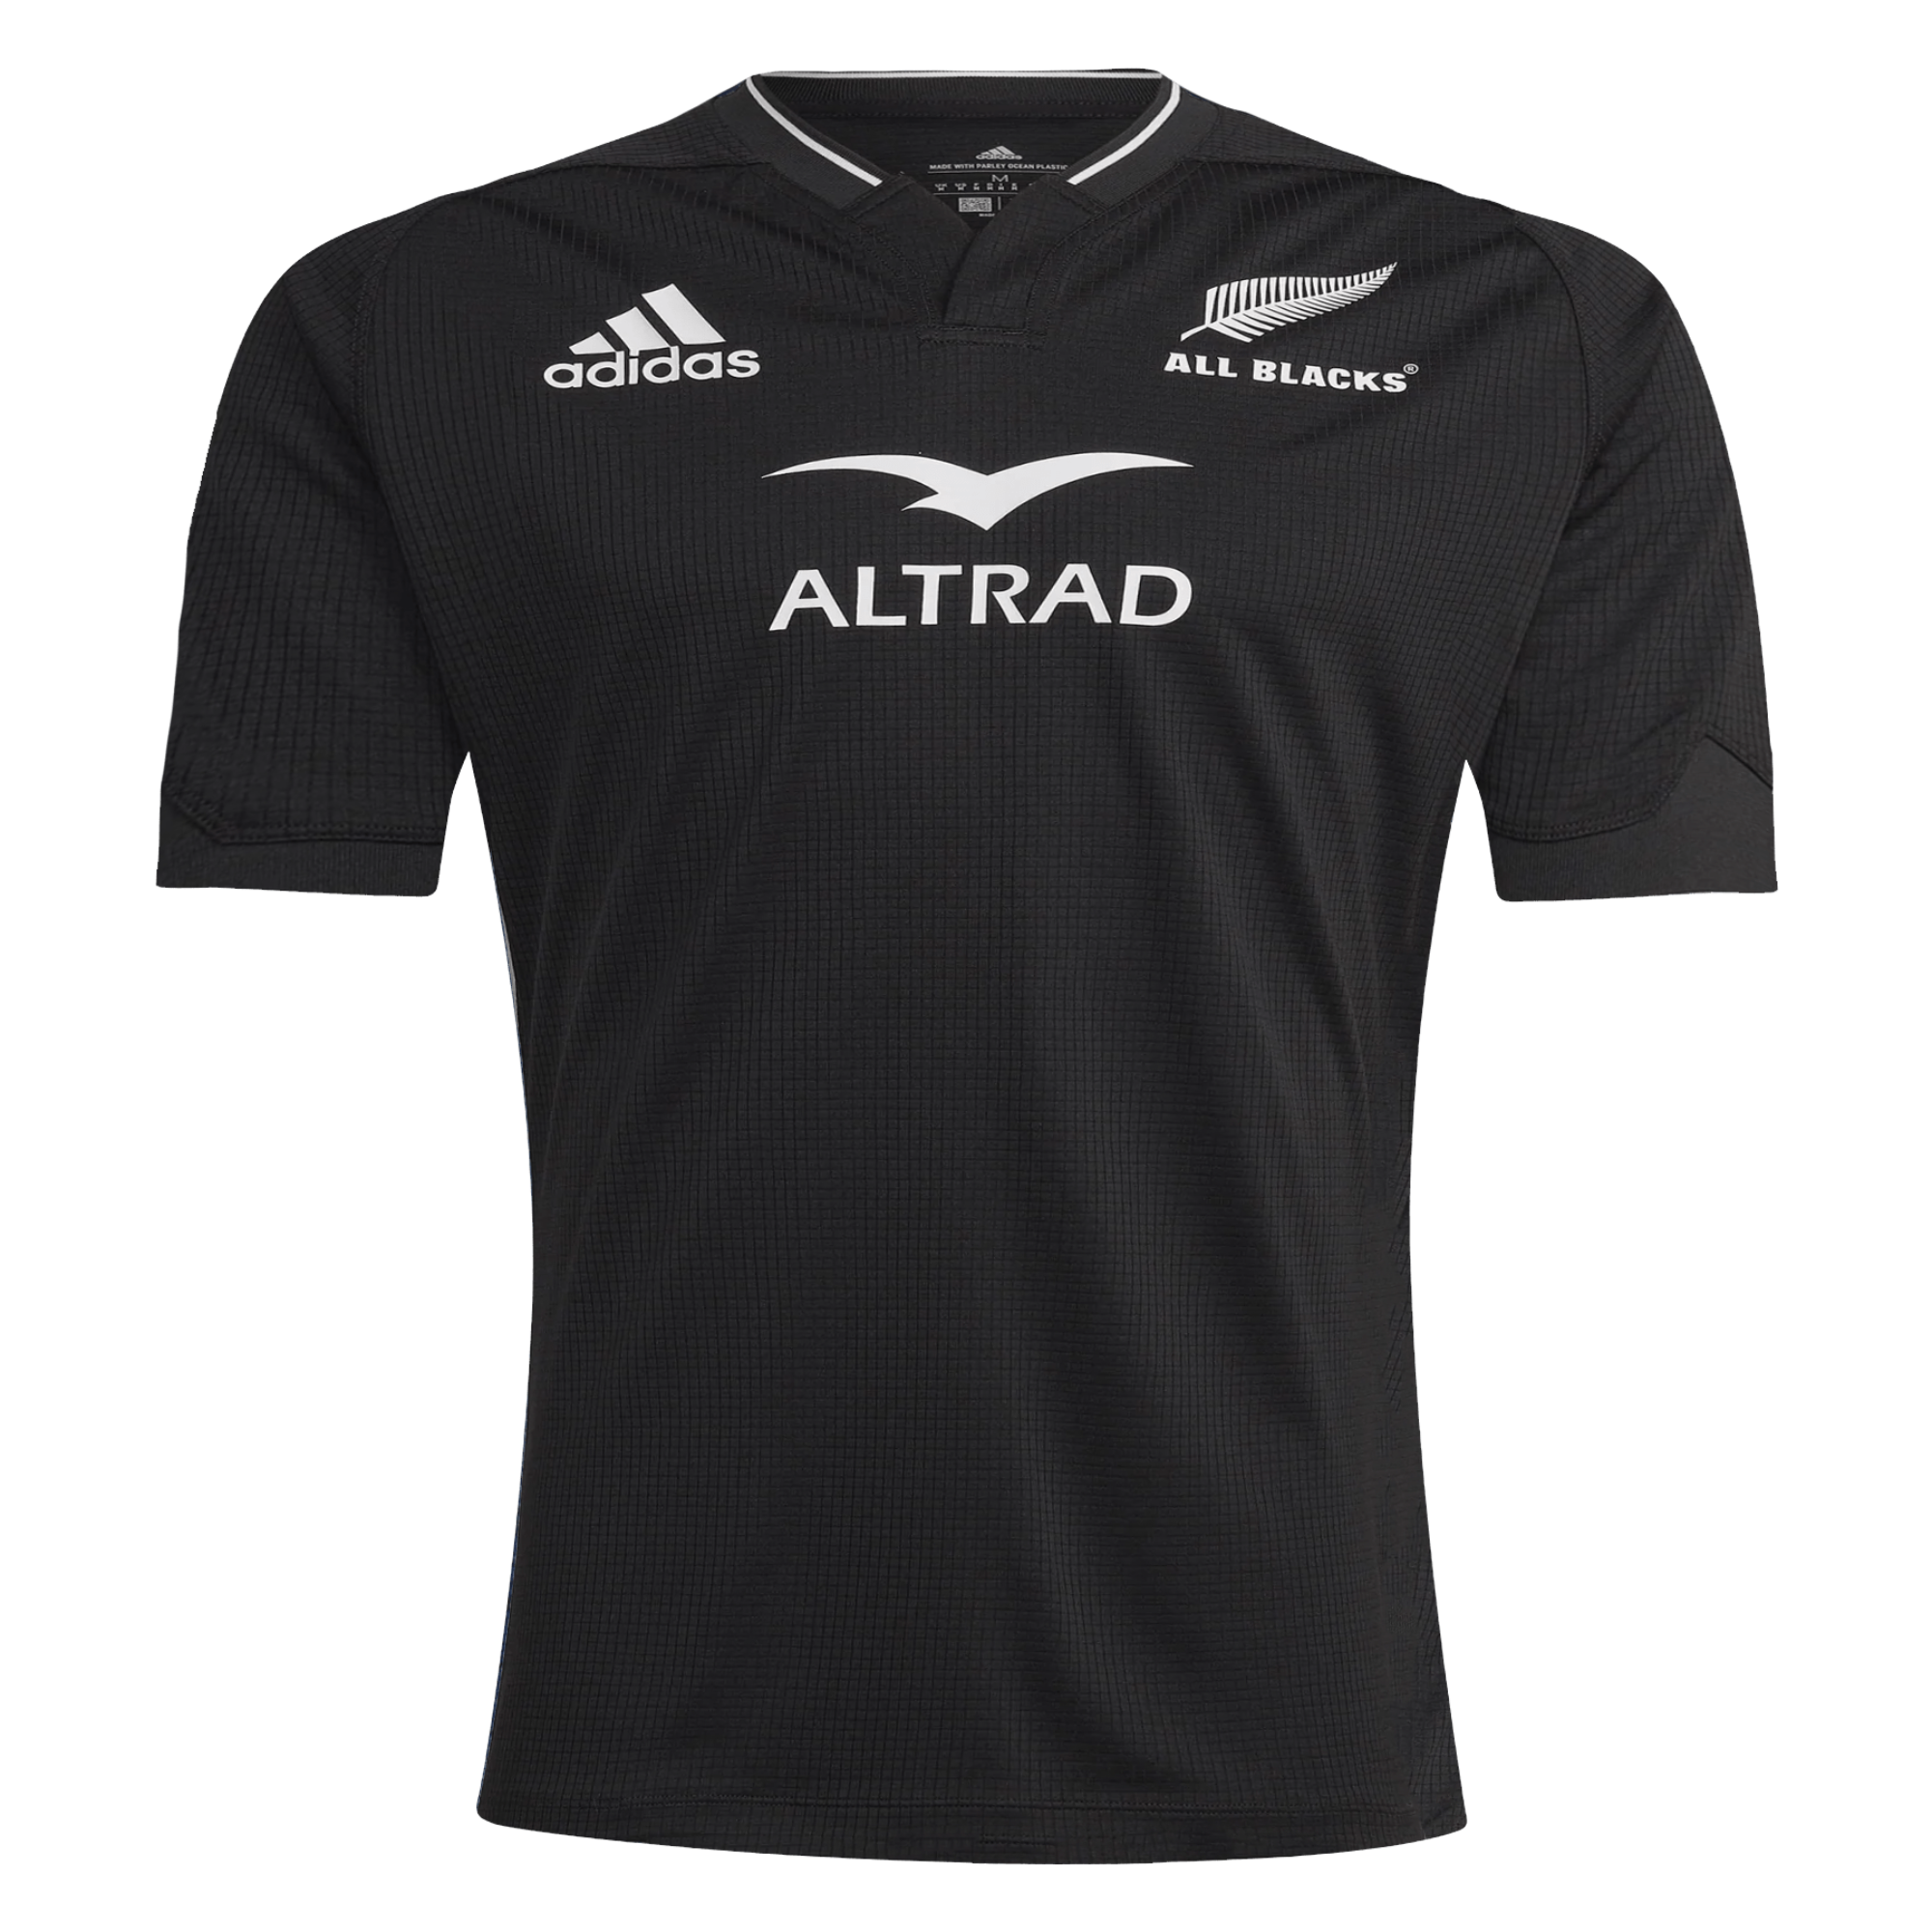 New All Blacks jersey the strongest and most innovative ever